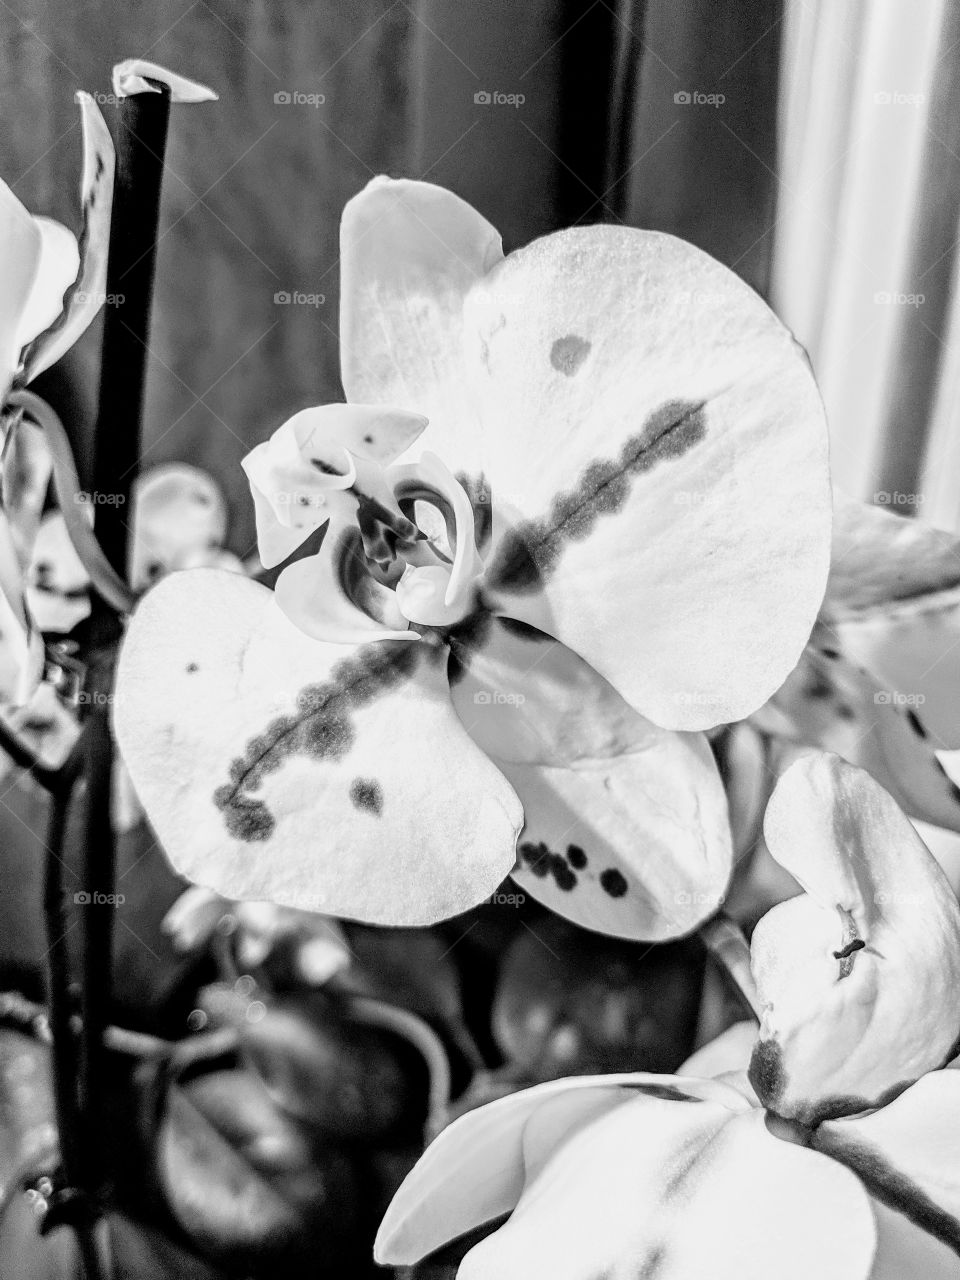 Beautiful dancing orchid, even without color.